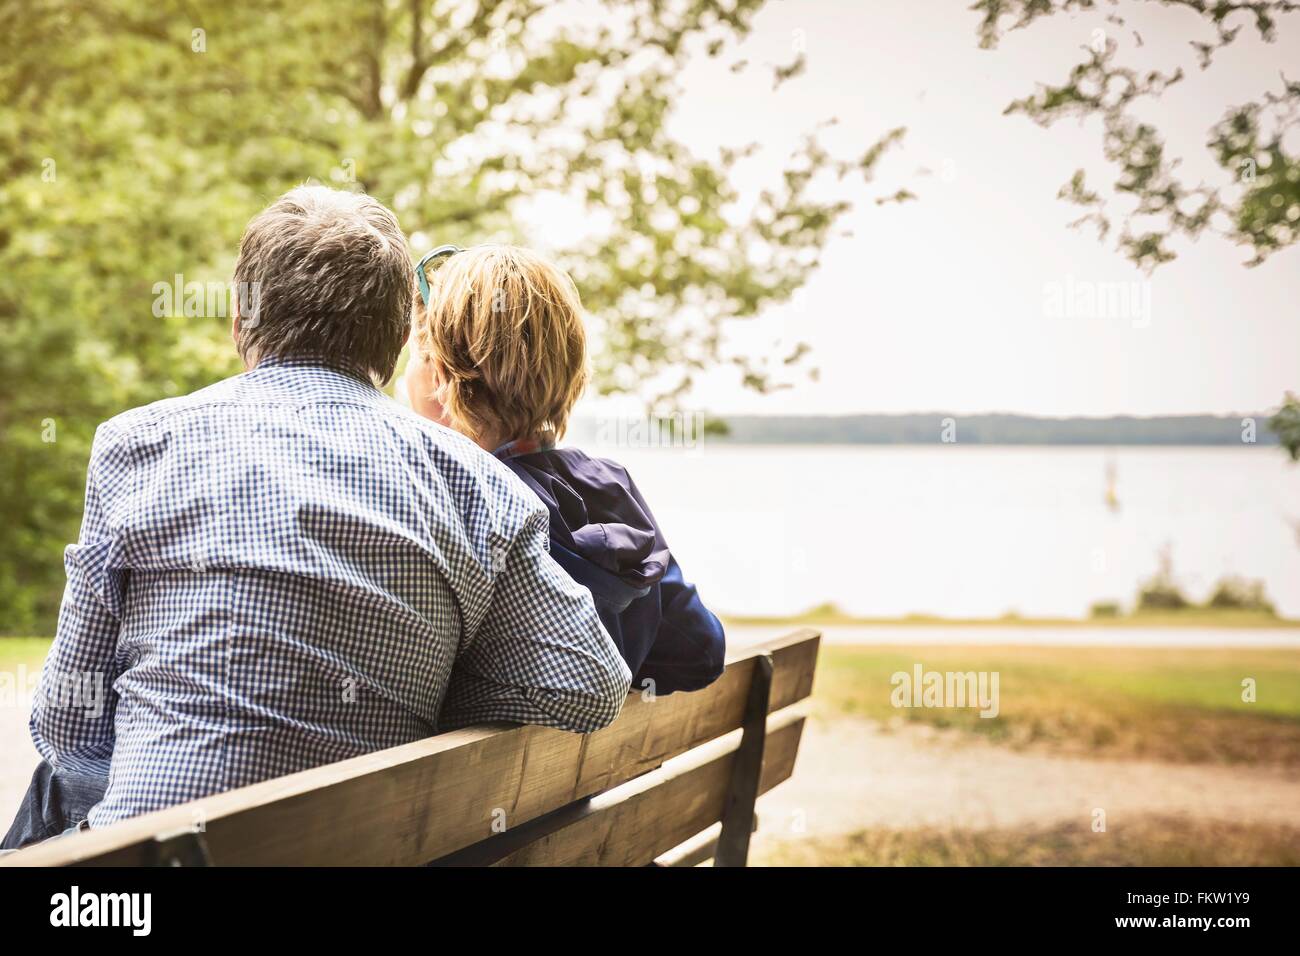 Rear view of adult couple on lakeside park bench Stock Photo